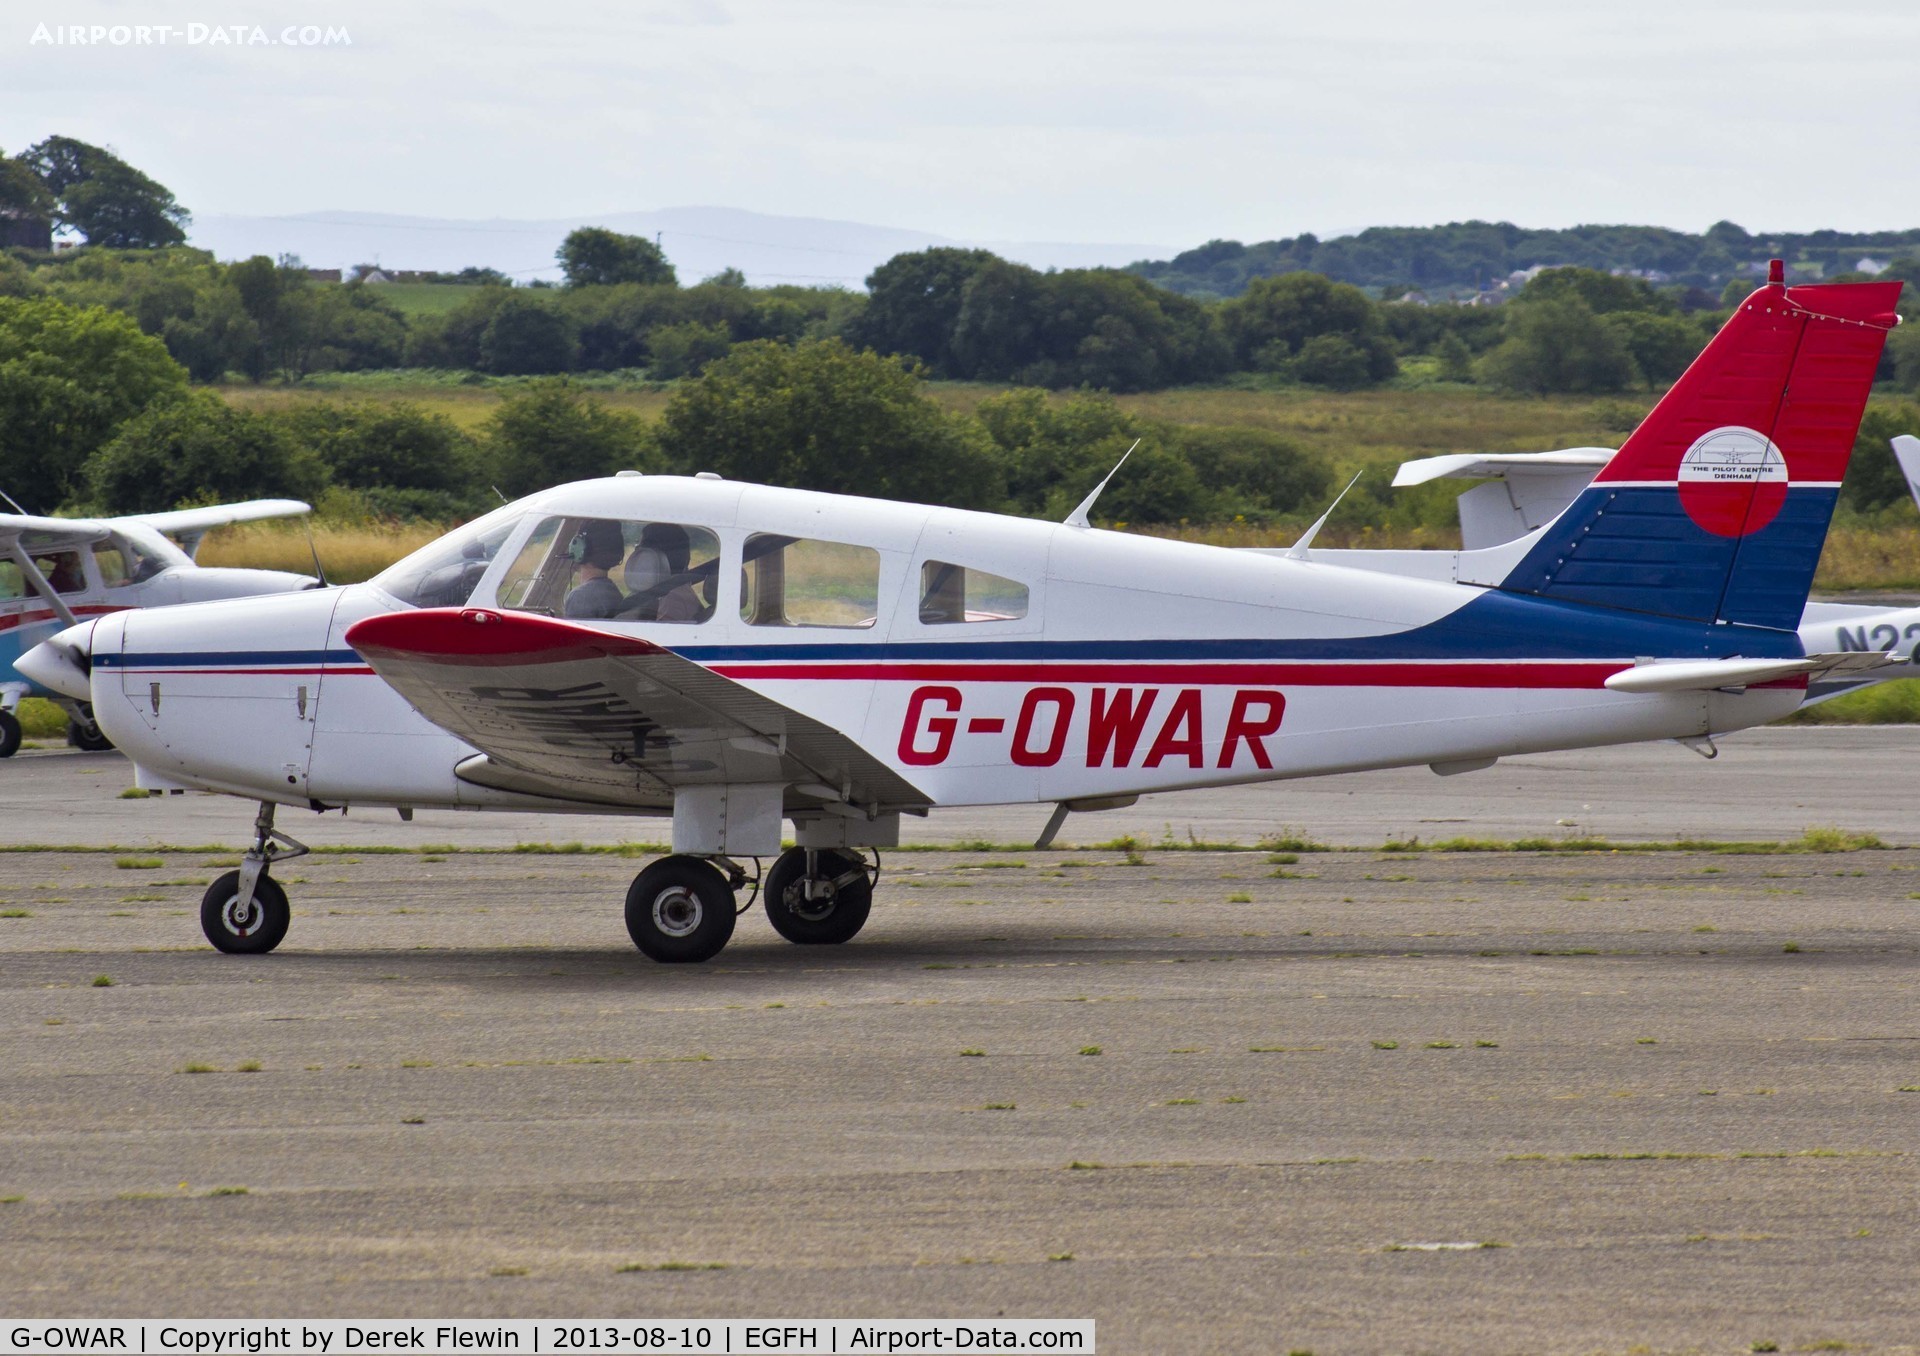 G-OWAR, 1986 Piper PA-28-161 Cherokee Warrior II C/N 28-8616054, Visiting Piper PA-28-161 on a 